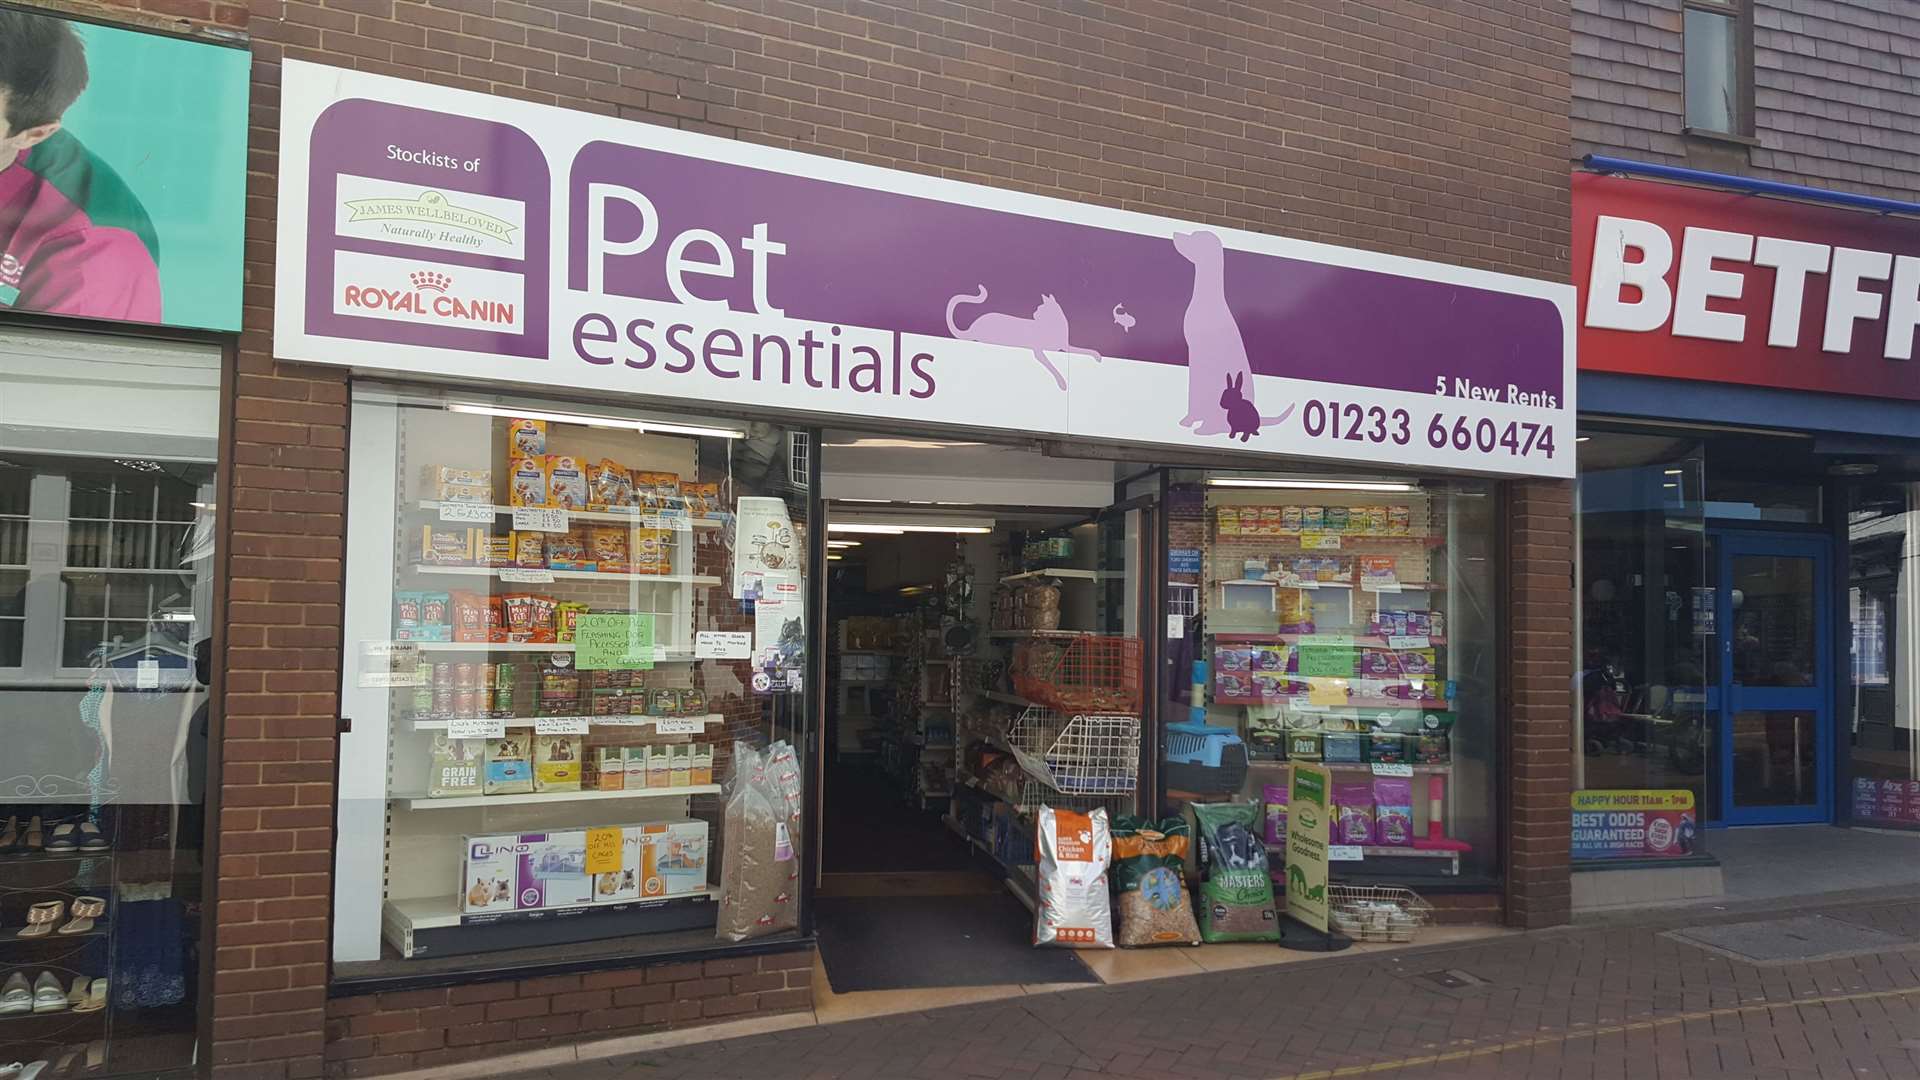 The former Pet Essentials store is one of the shops facing demolition